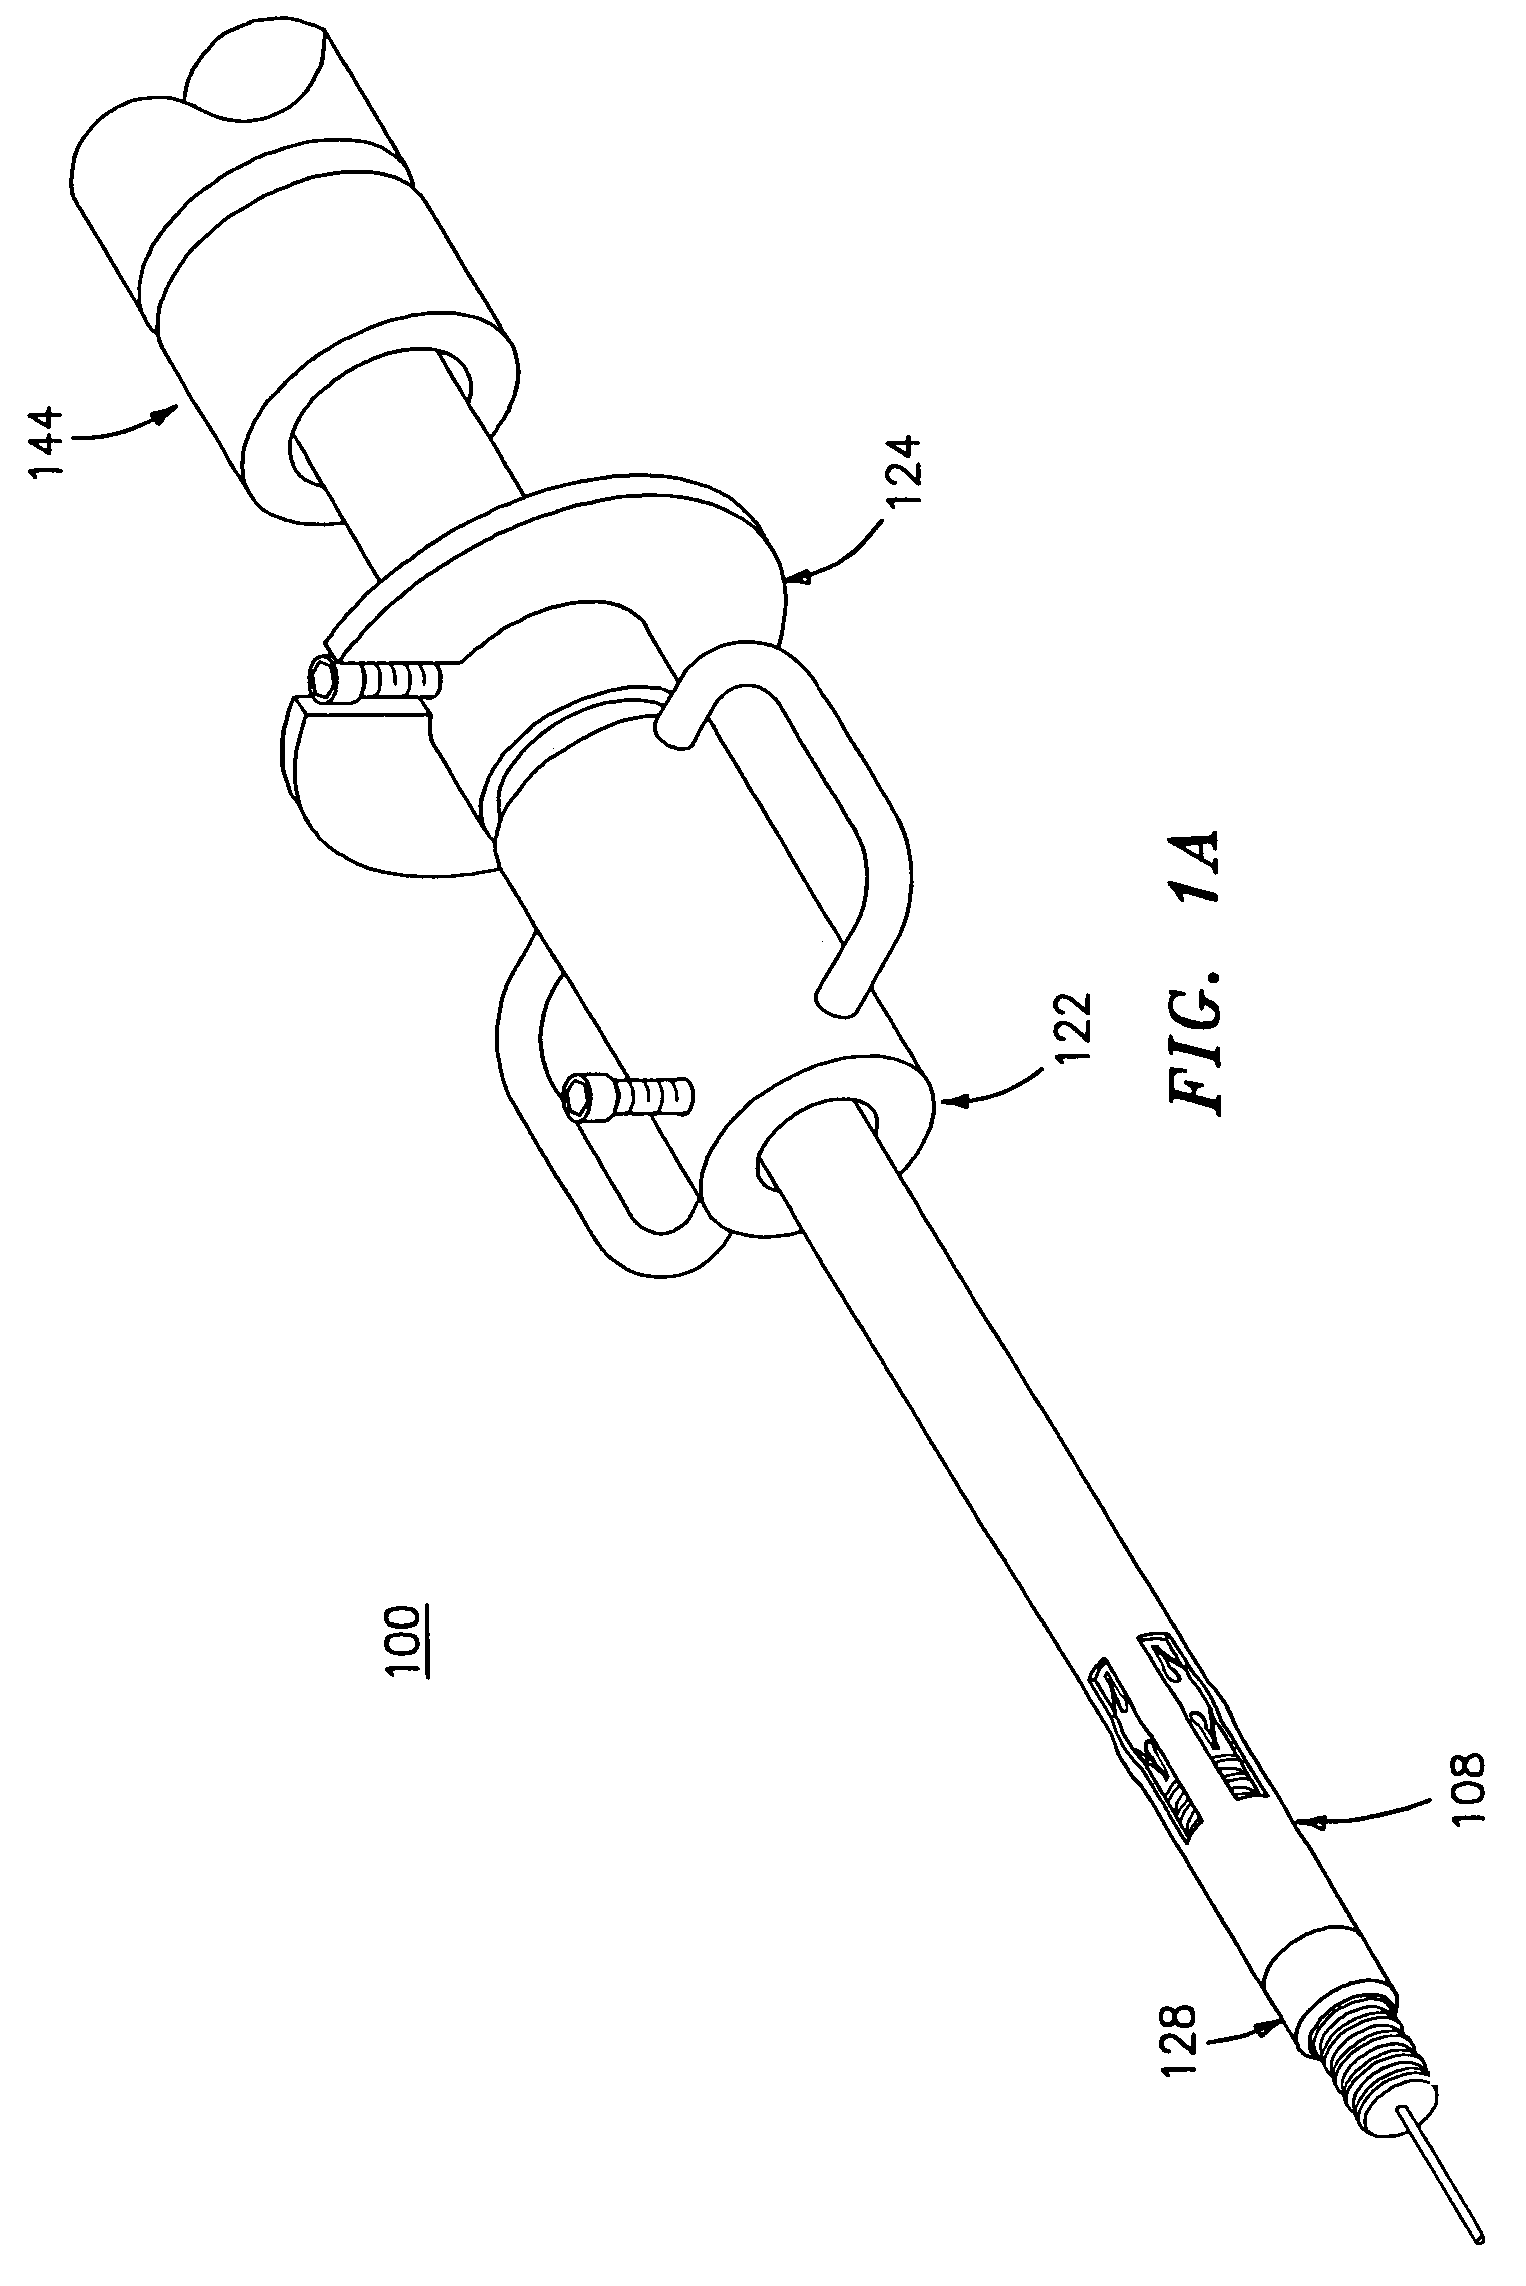 Method and apparatus for anastomosis including an anchoring sleeve